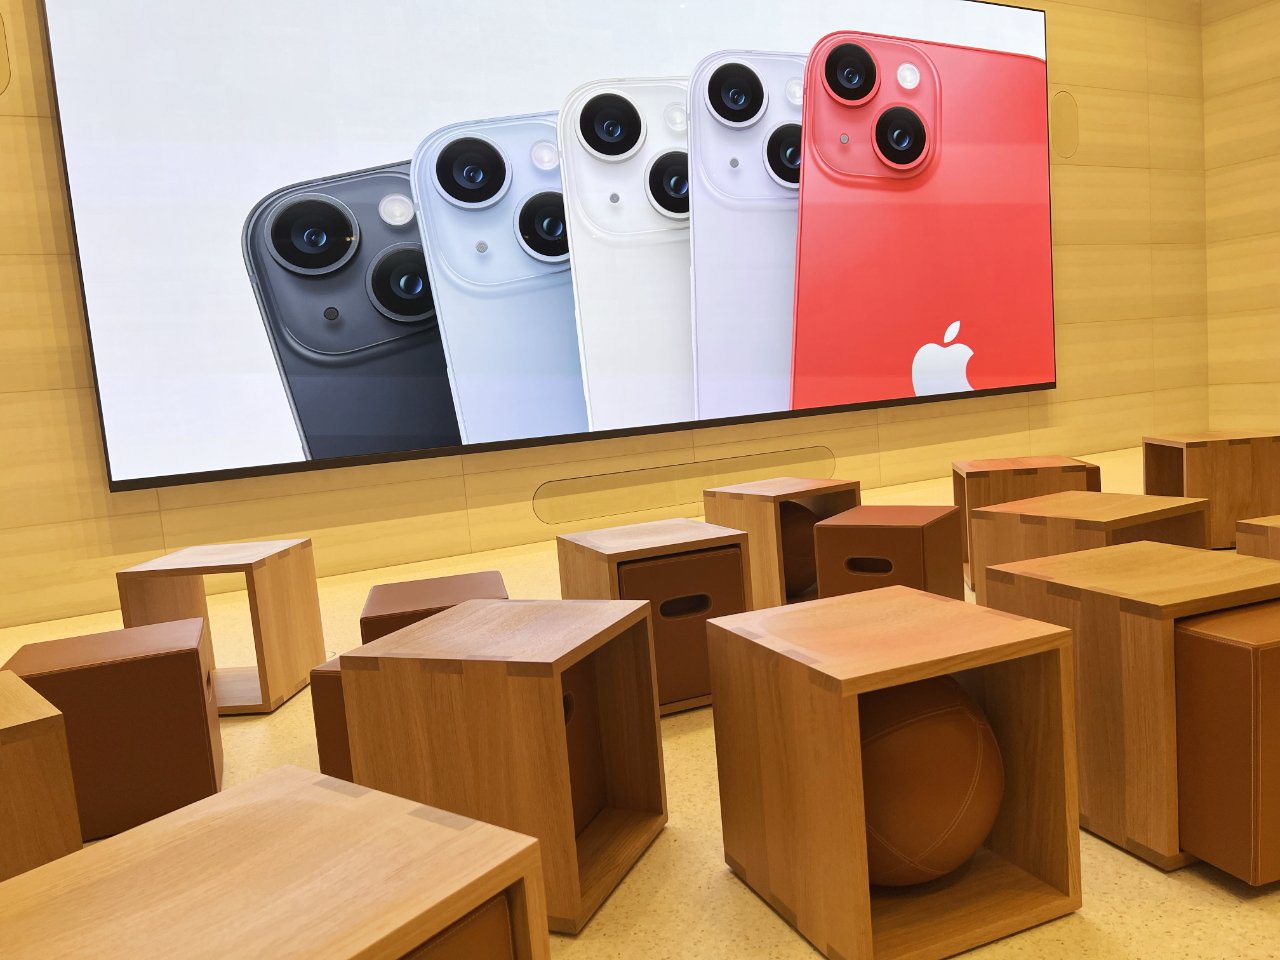 Forty wooden cubes with extra seats in most of them, in the Today at Apple section